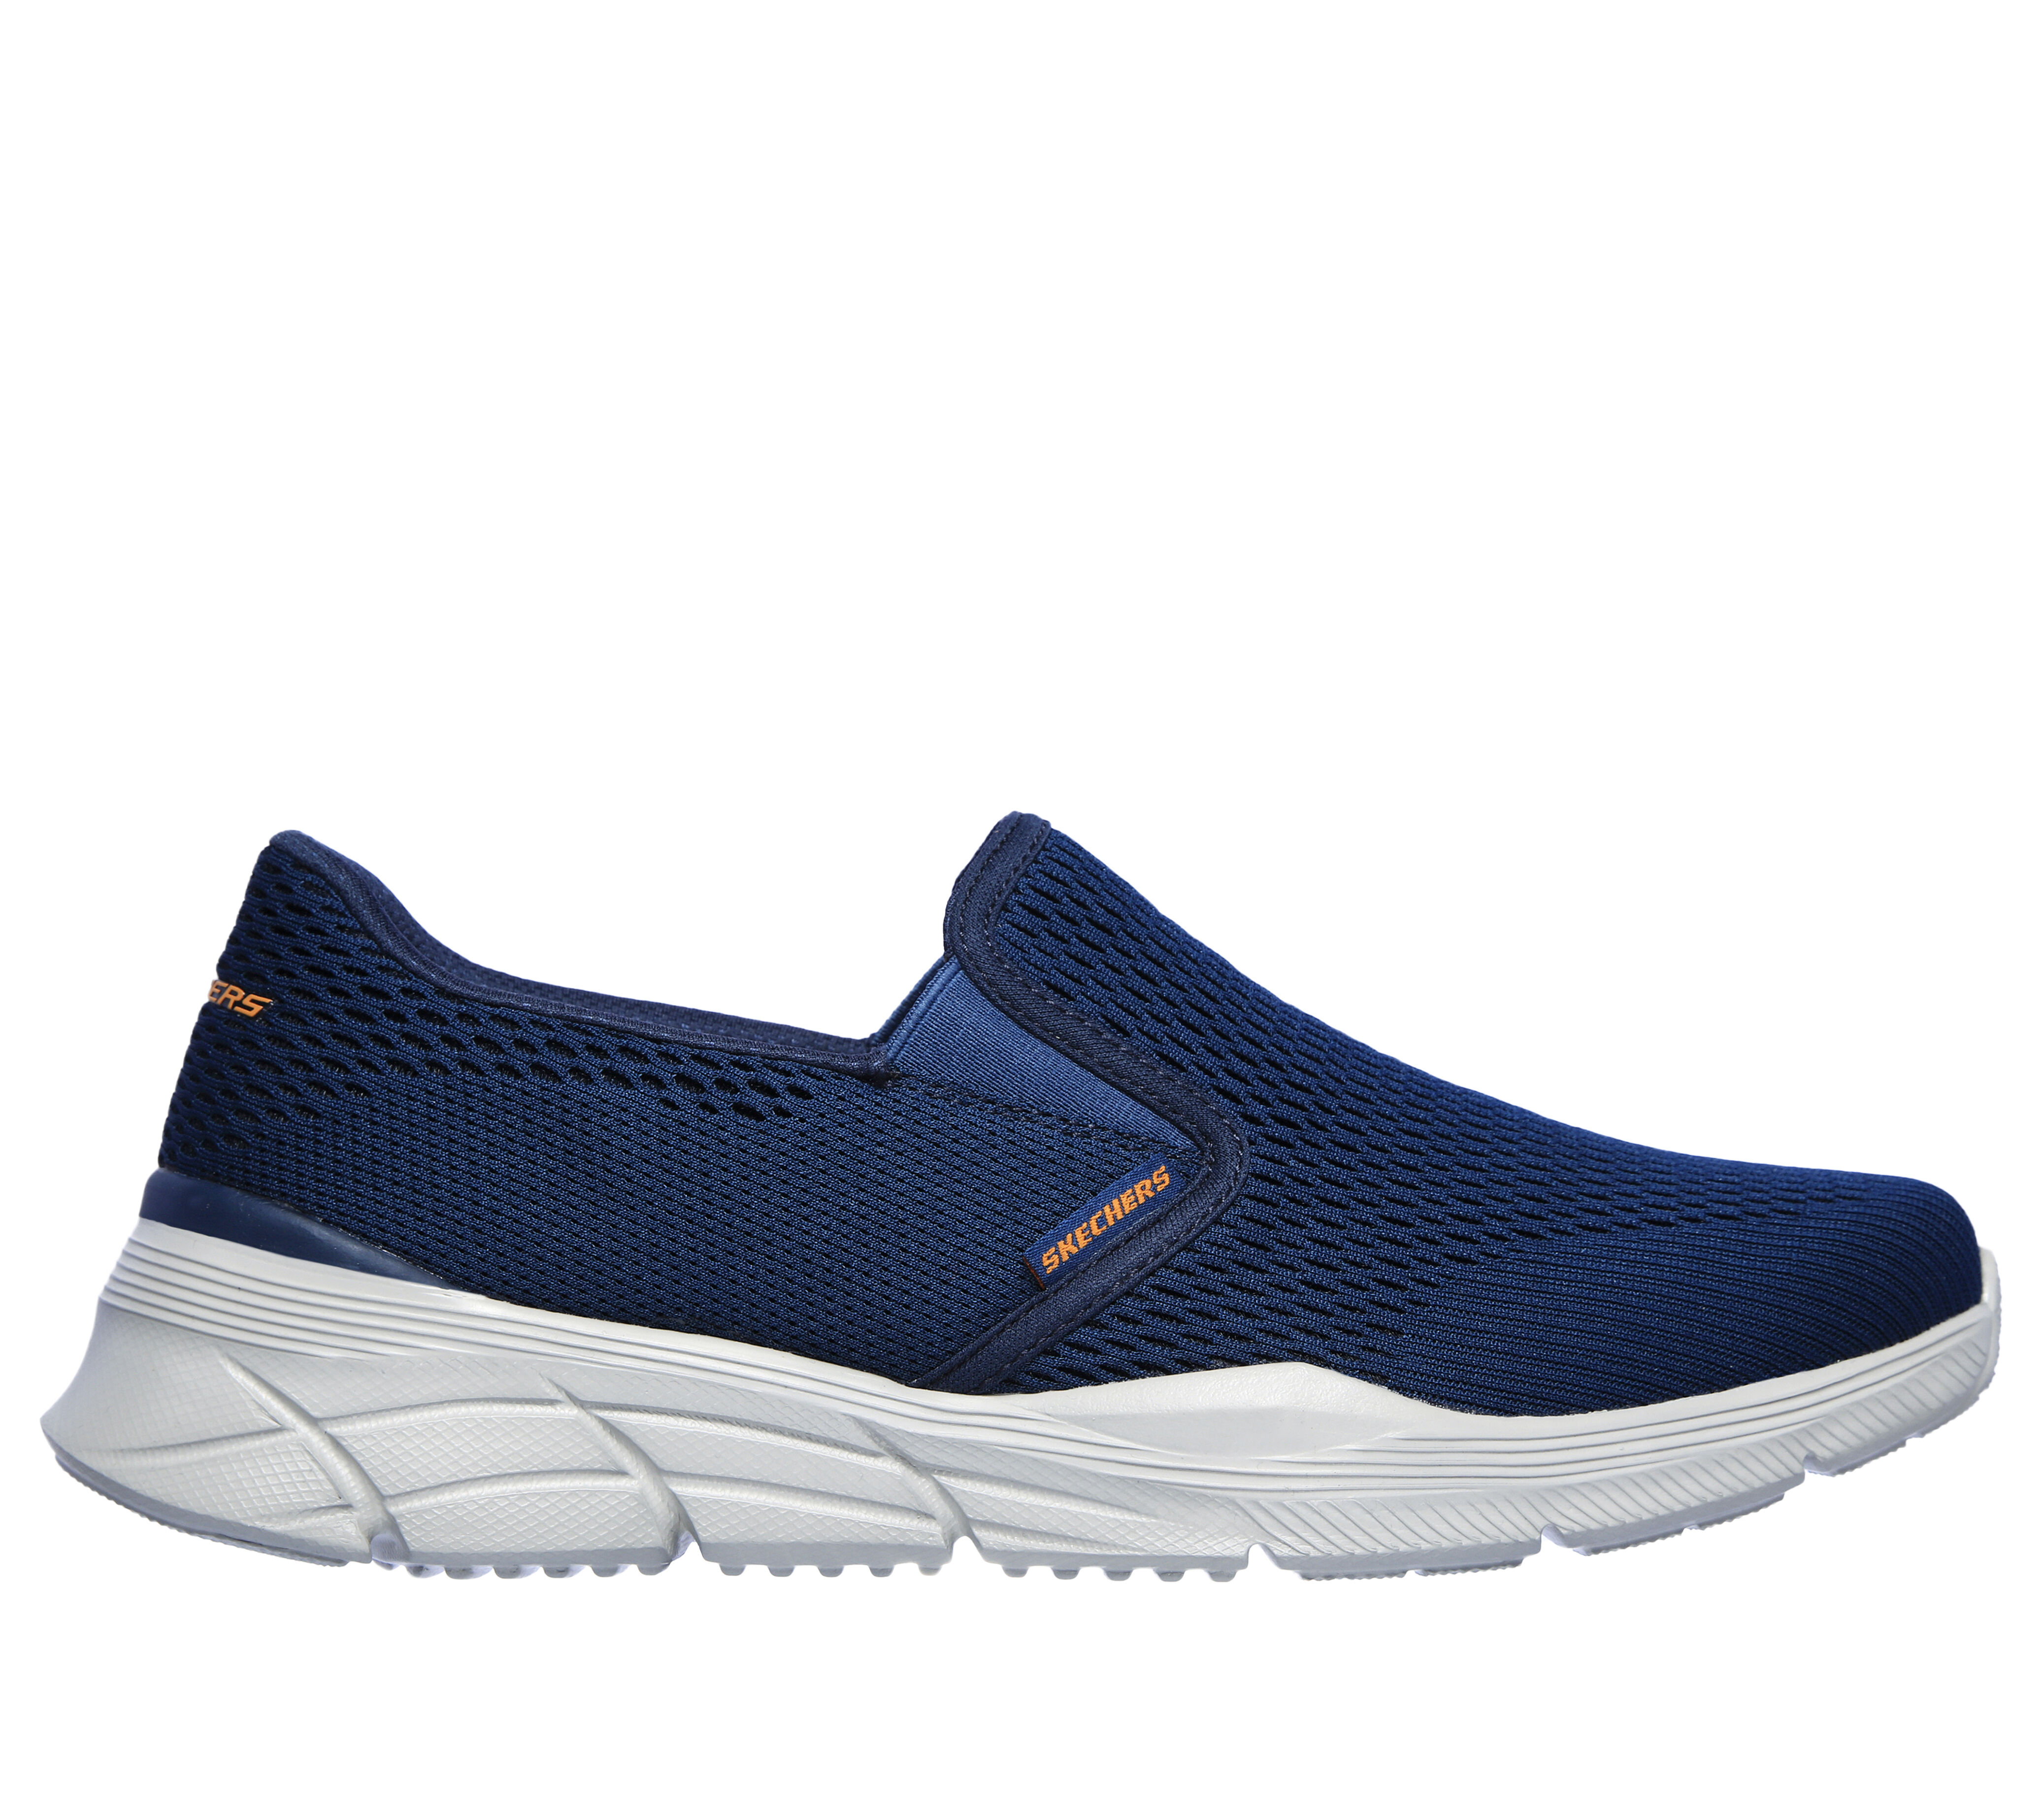 skechers casual slip on shoes mens